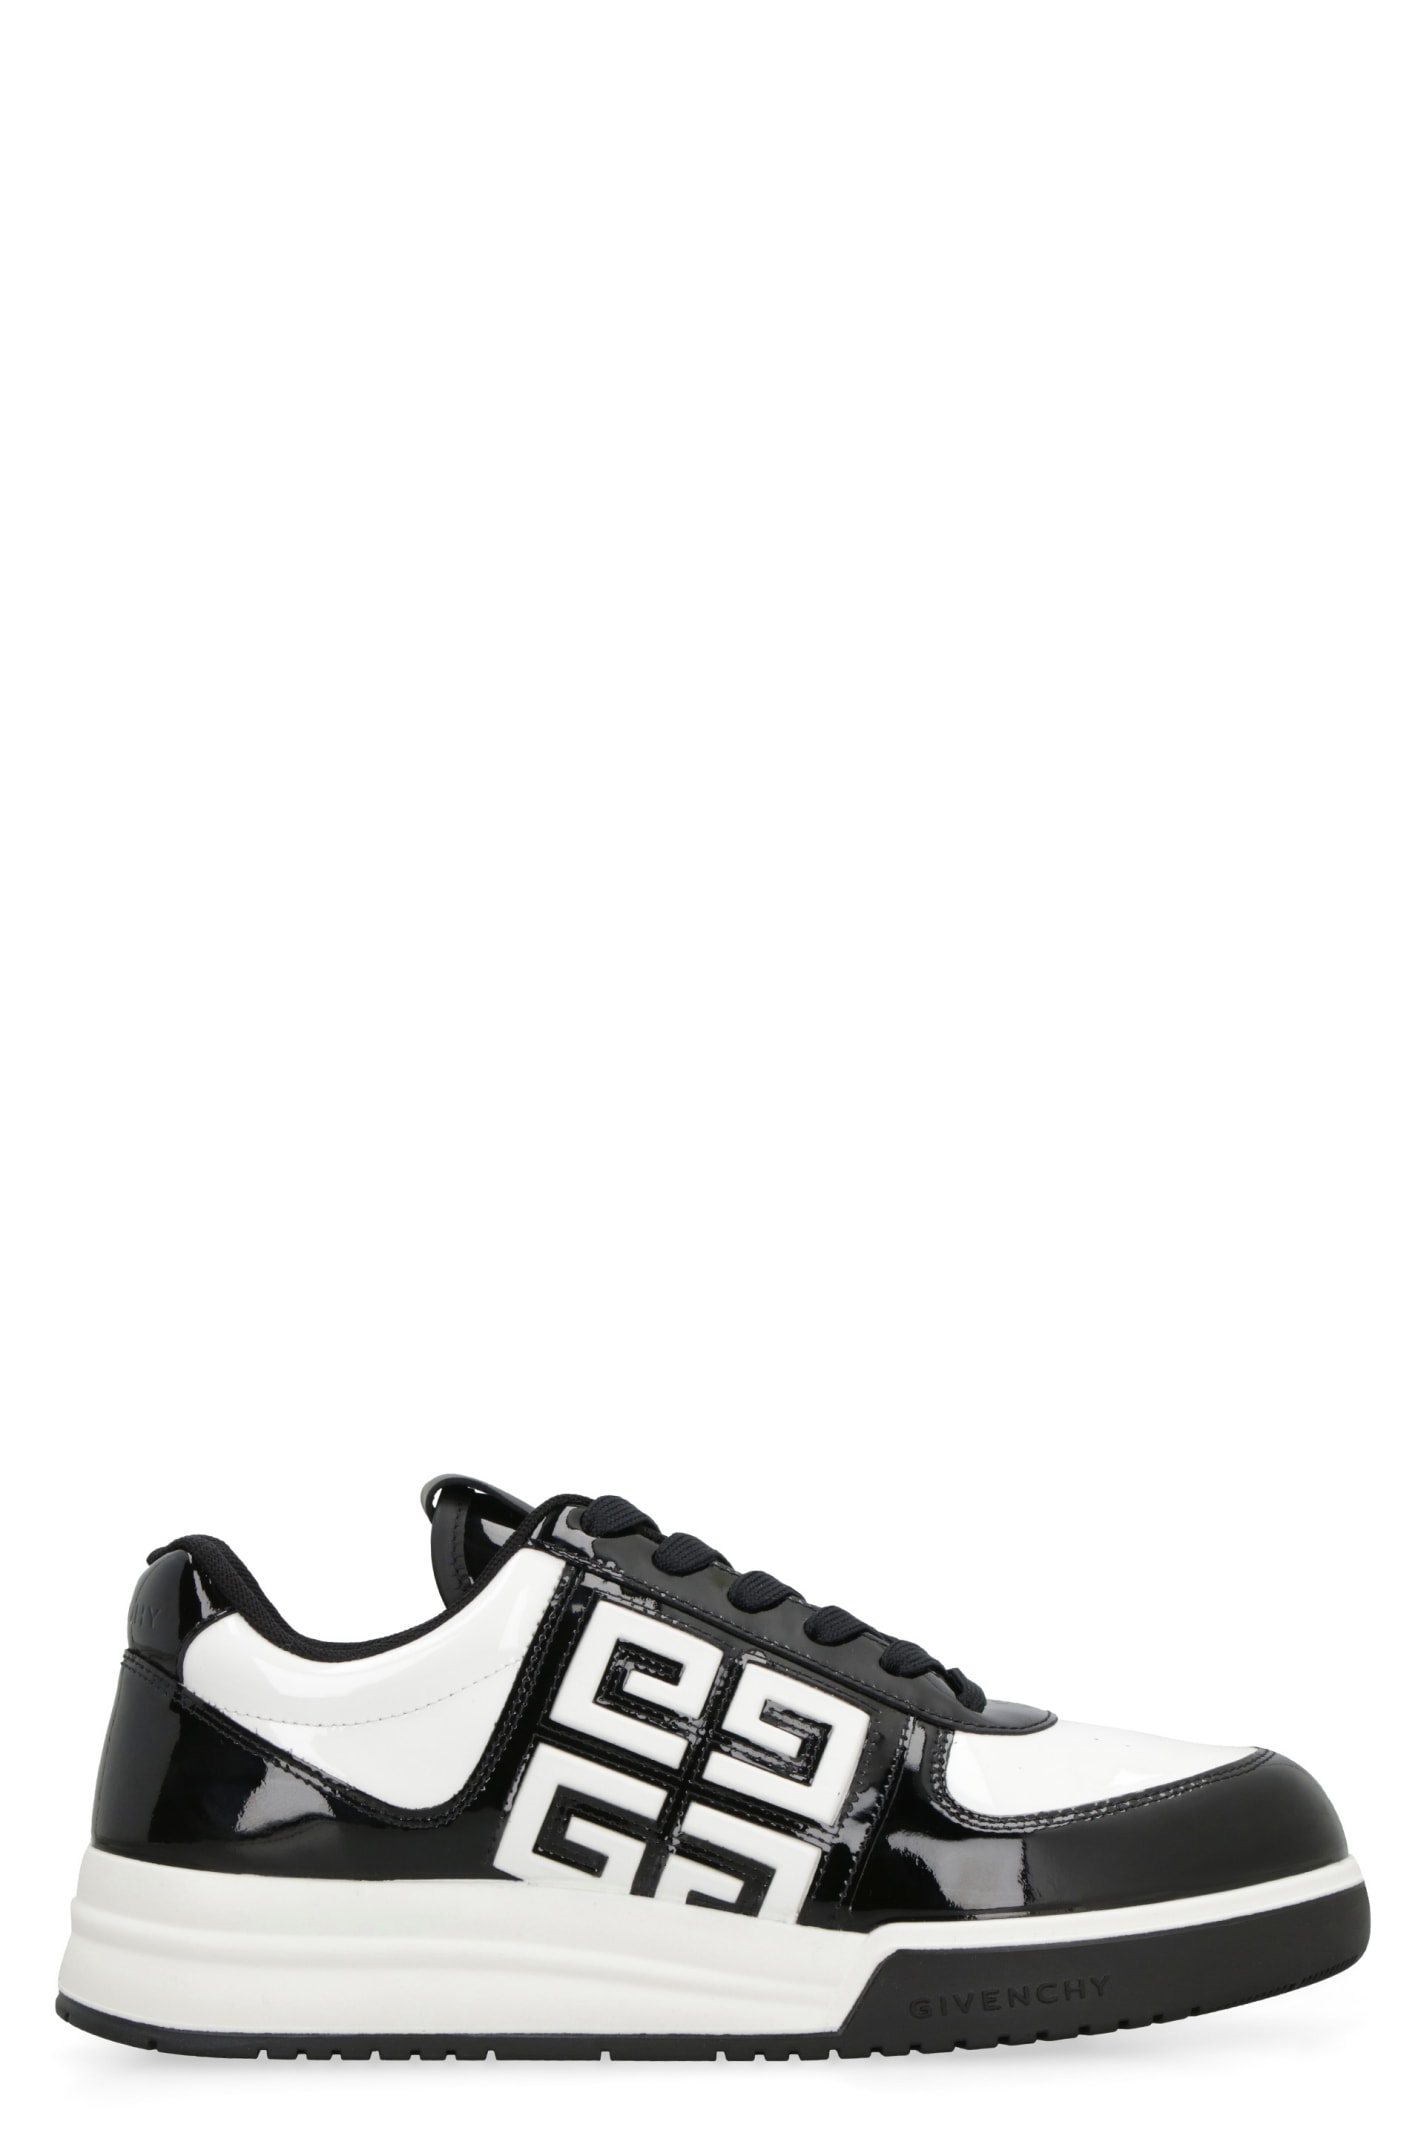 Givenchy G4 Low-top Sneakers